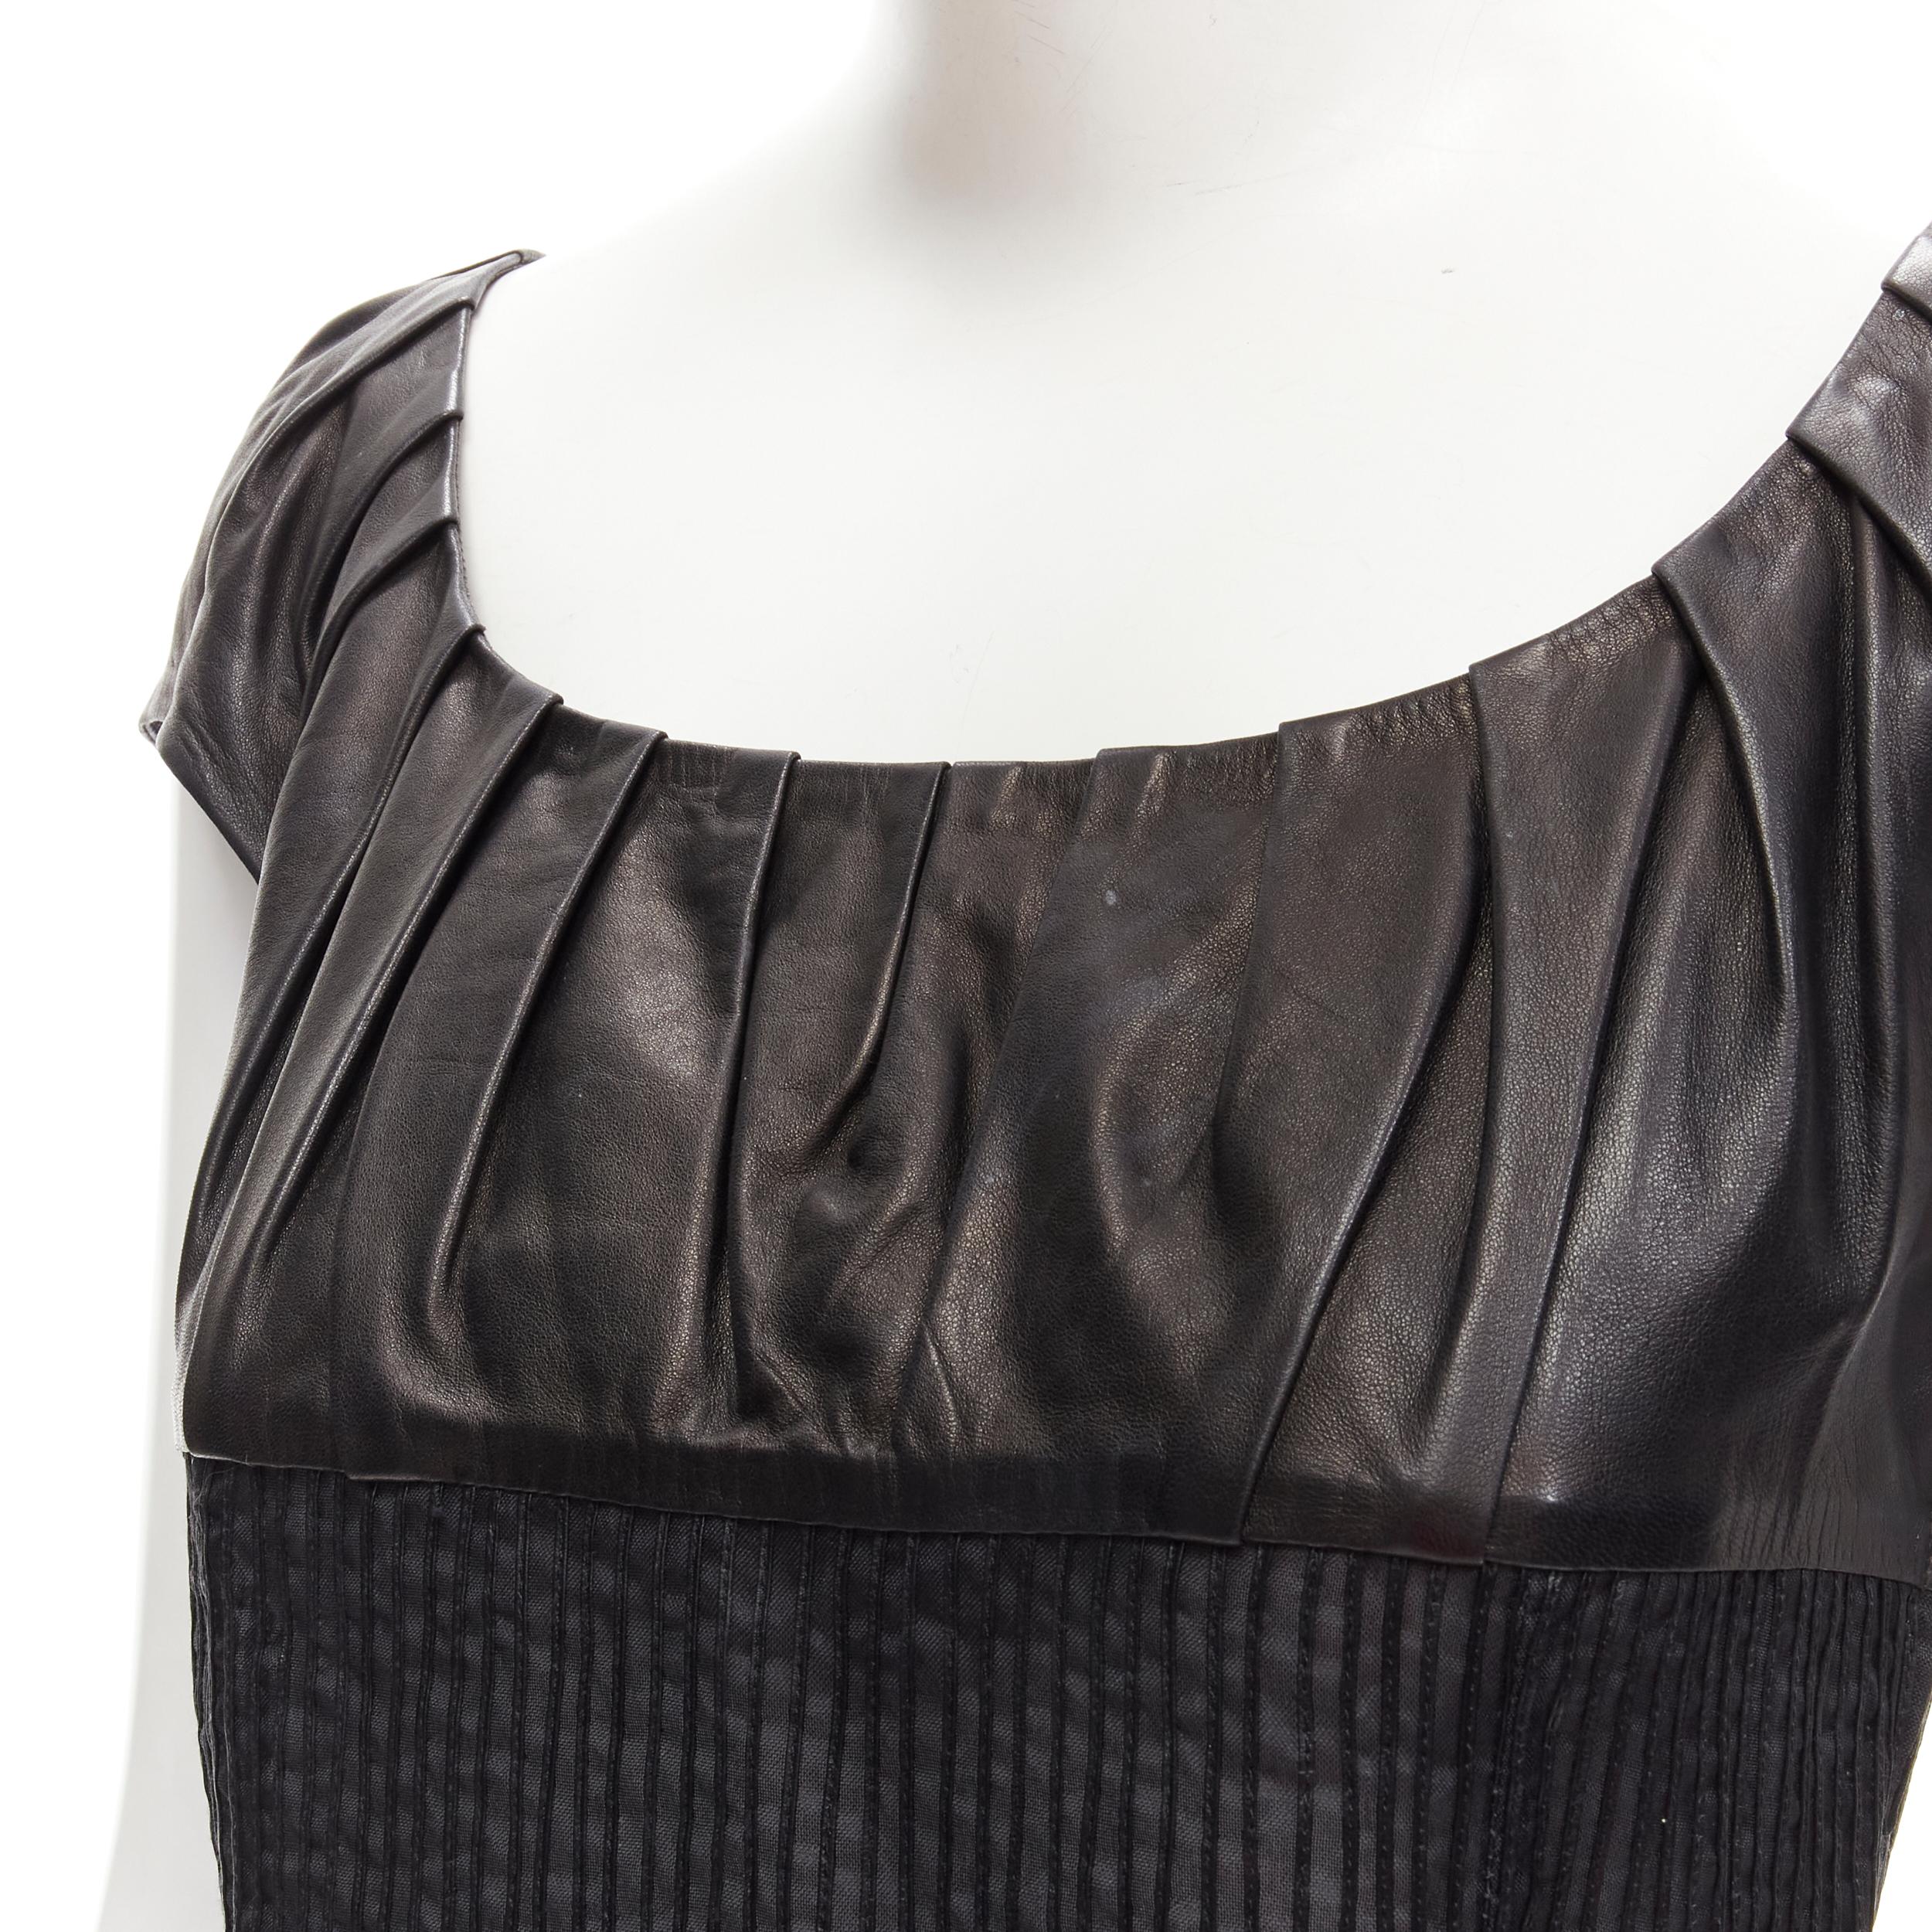 GUCCI TOM FORD Vintage black leather cap pleated sheer waist top S
Brand: Gucci
Designer: Tom Ford
Material: Leather
Color: Black
Pattern: Solid
Closure: Zip
Extra Detail: Square scoop neck. Cap sleeve. Pleated leather bust. Sheer bodice with